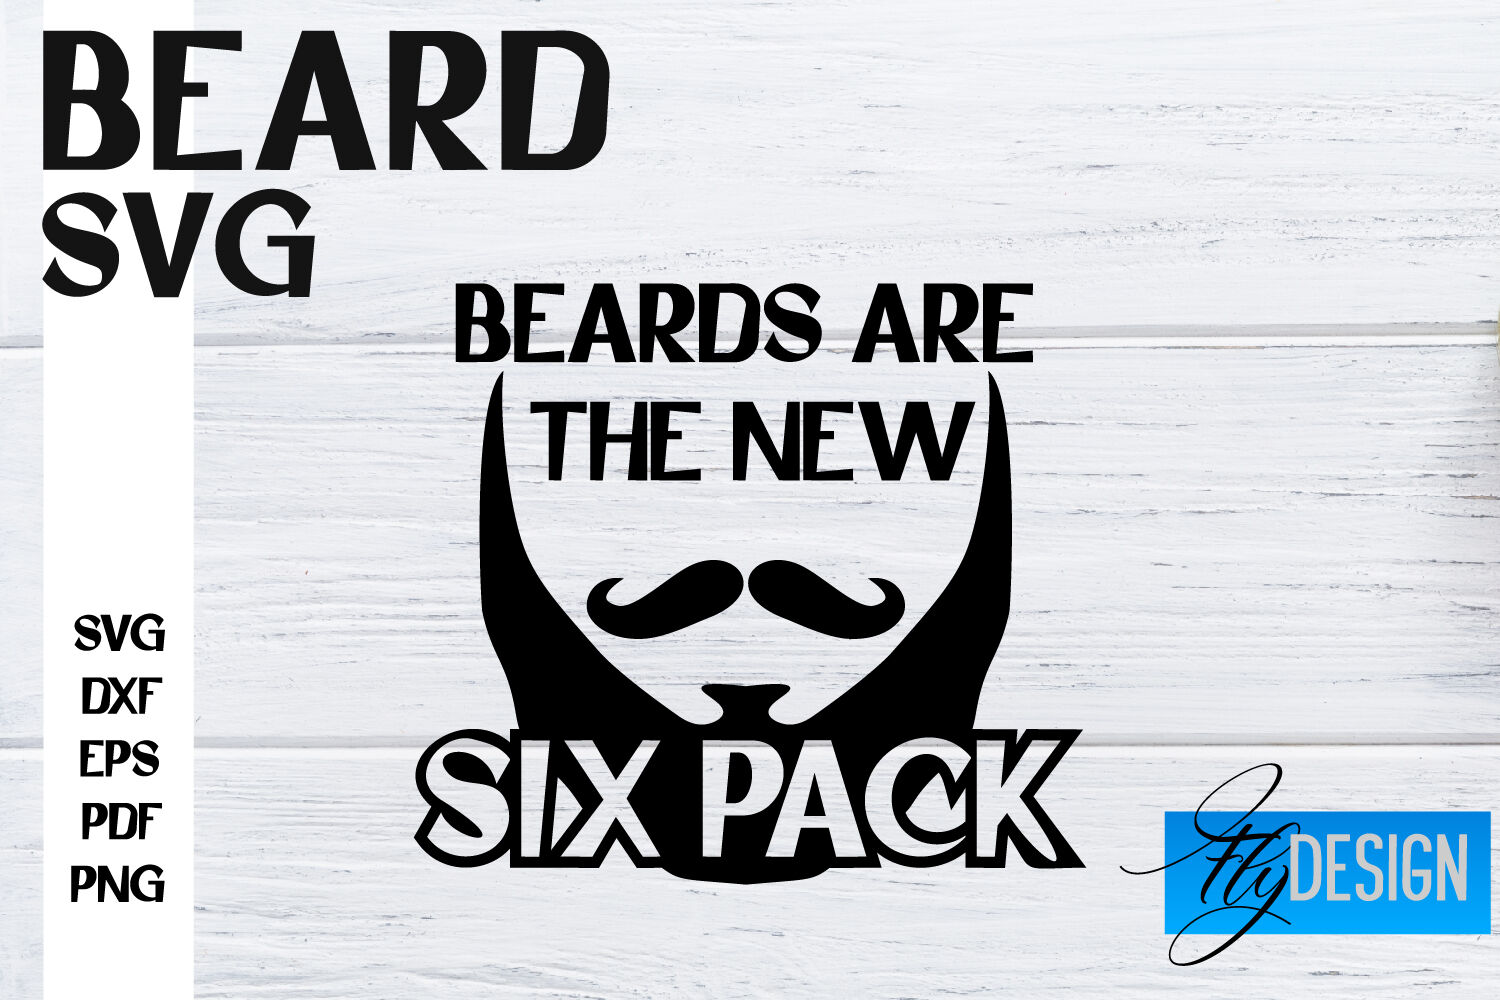 Beard SVG Design | Funny Quotes SVG Design | Bearded Men SVG By Fly Design  | TheHungryJPEG